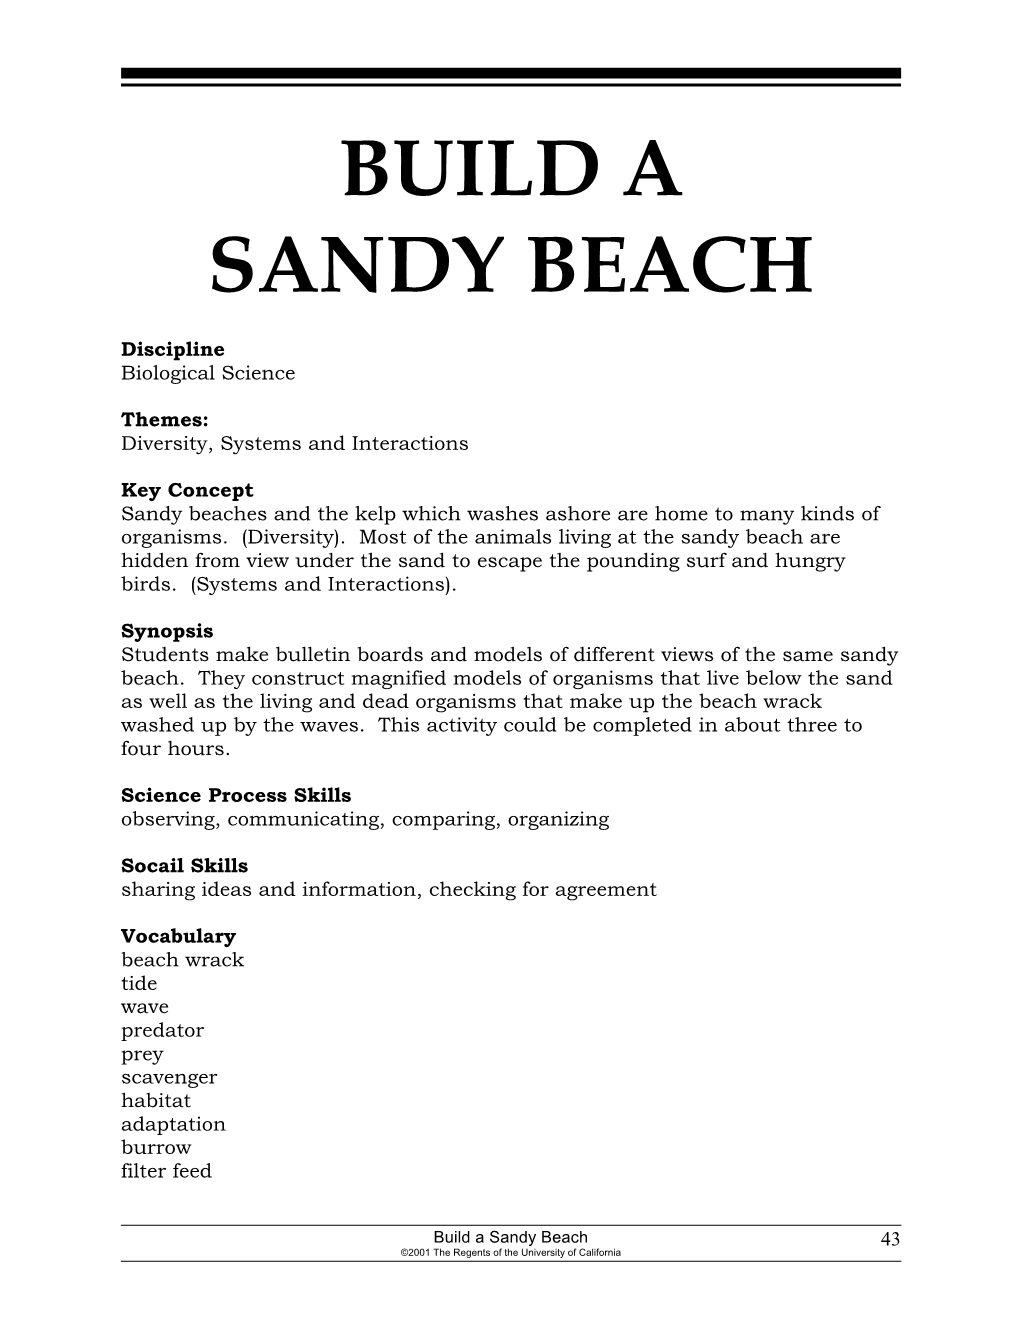 Build a Sandy Beach 43 ©2001 the Regents of the University of California